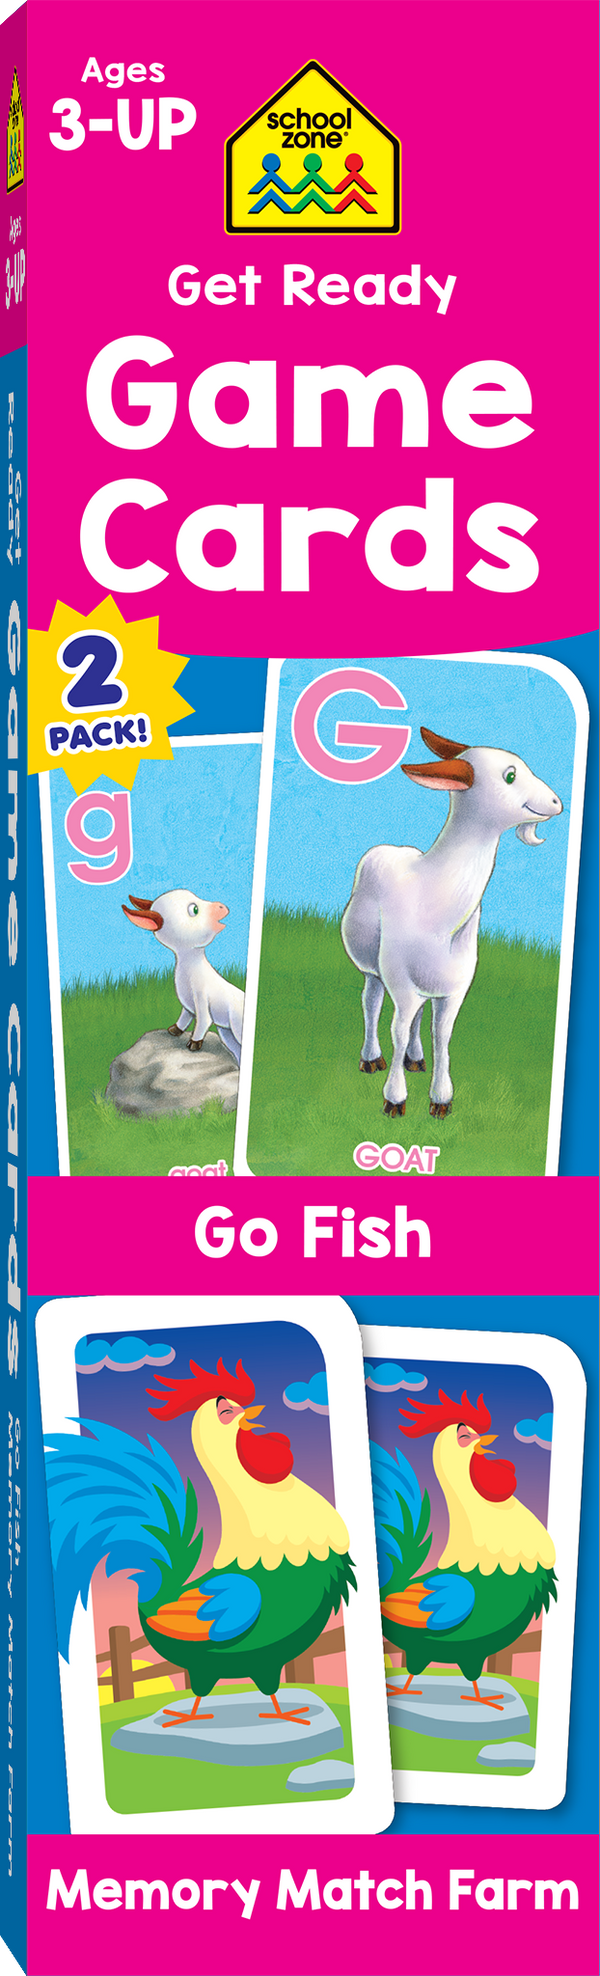 Get Ready Game Cards Go Fish & Memory Match Farm 2-Pack will create adorable learning fun!